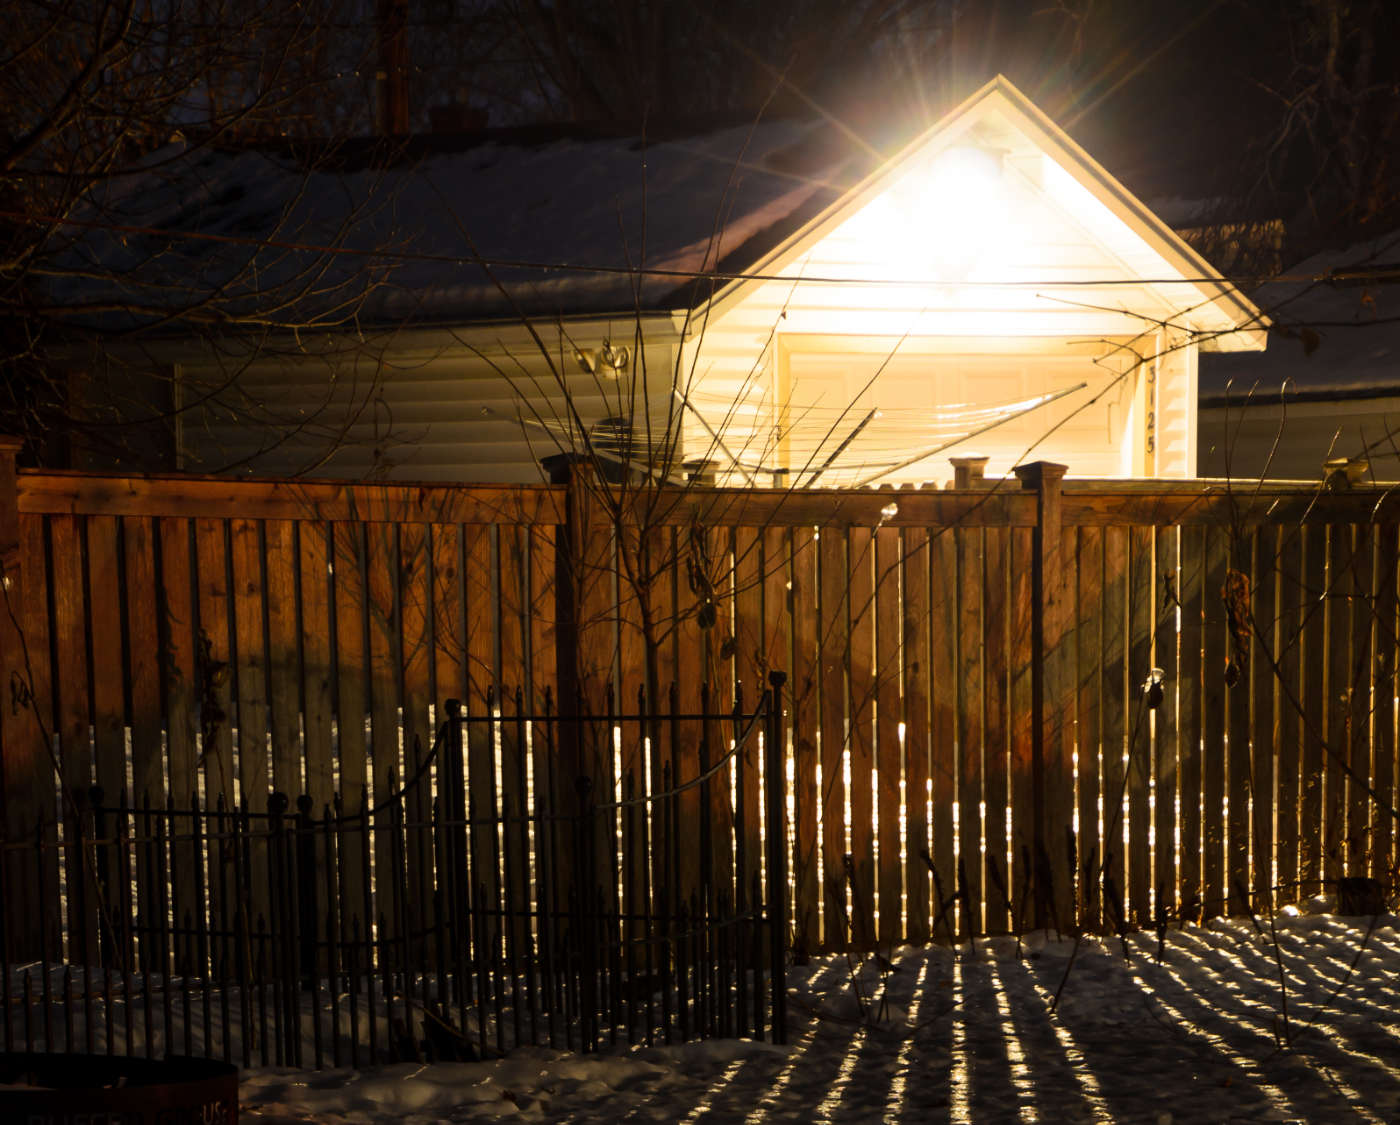 nighttime scene of a backlit wooden fence with a garage and overhead bright light in background